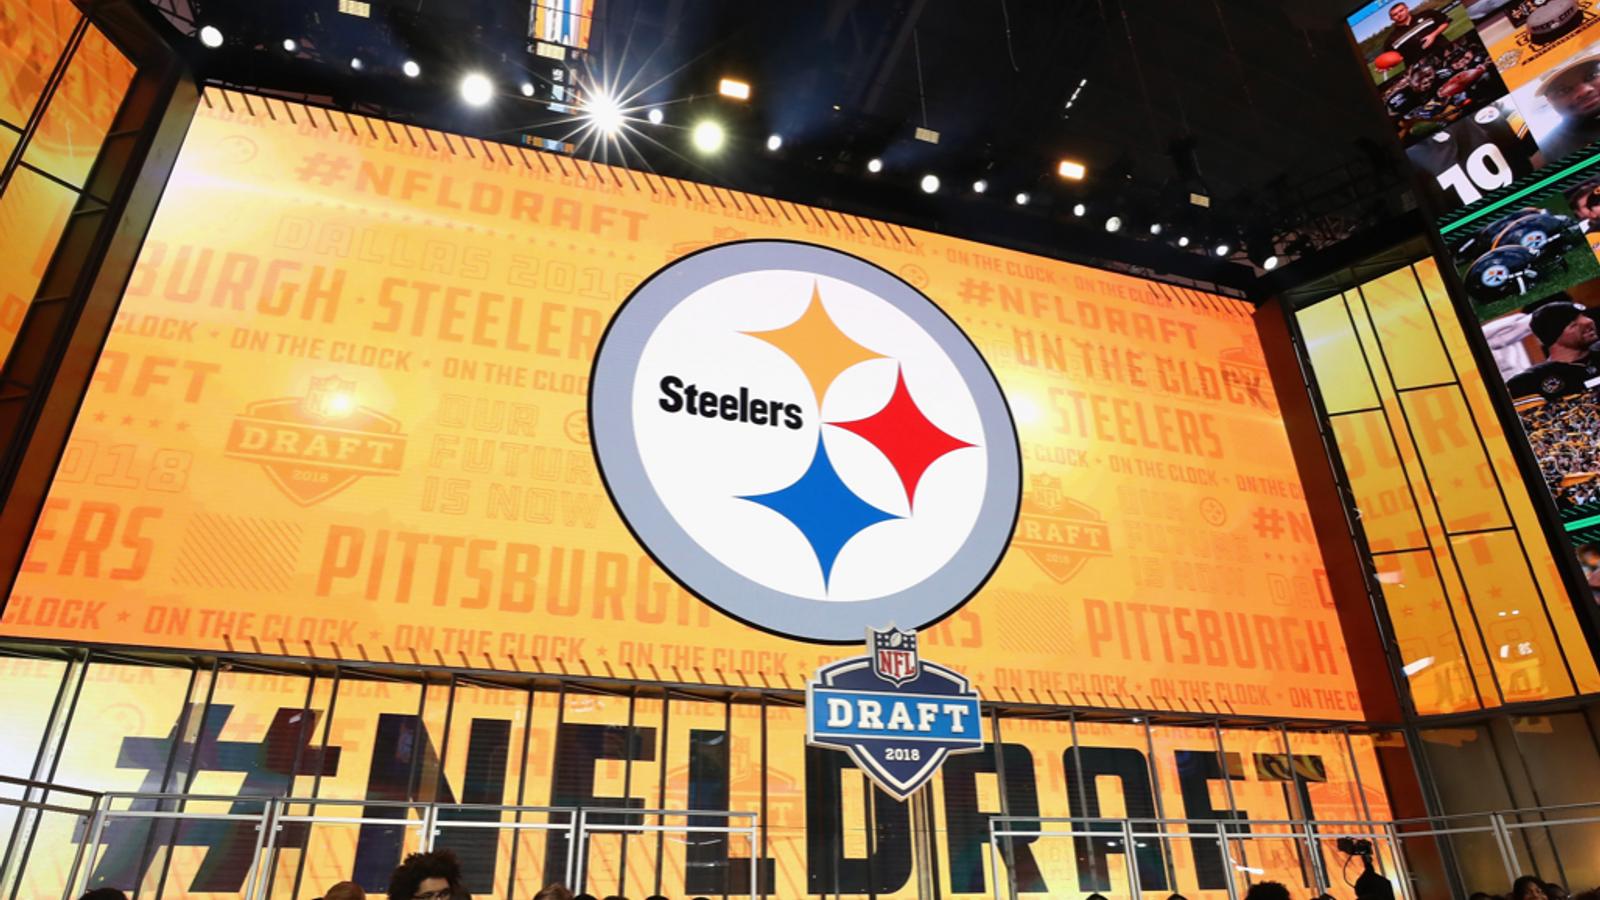 Steelers confirmed to be thinking major move! 